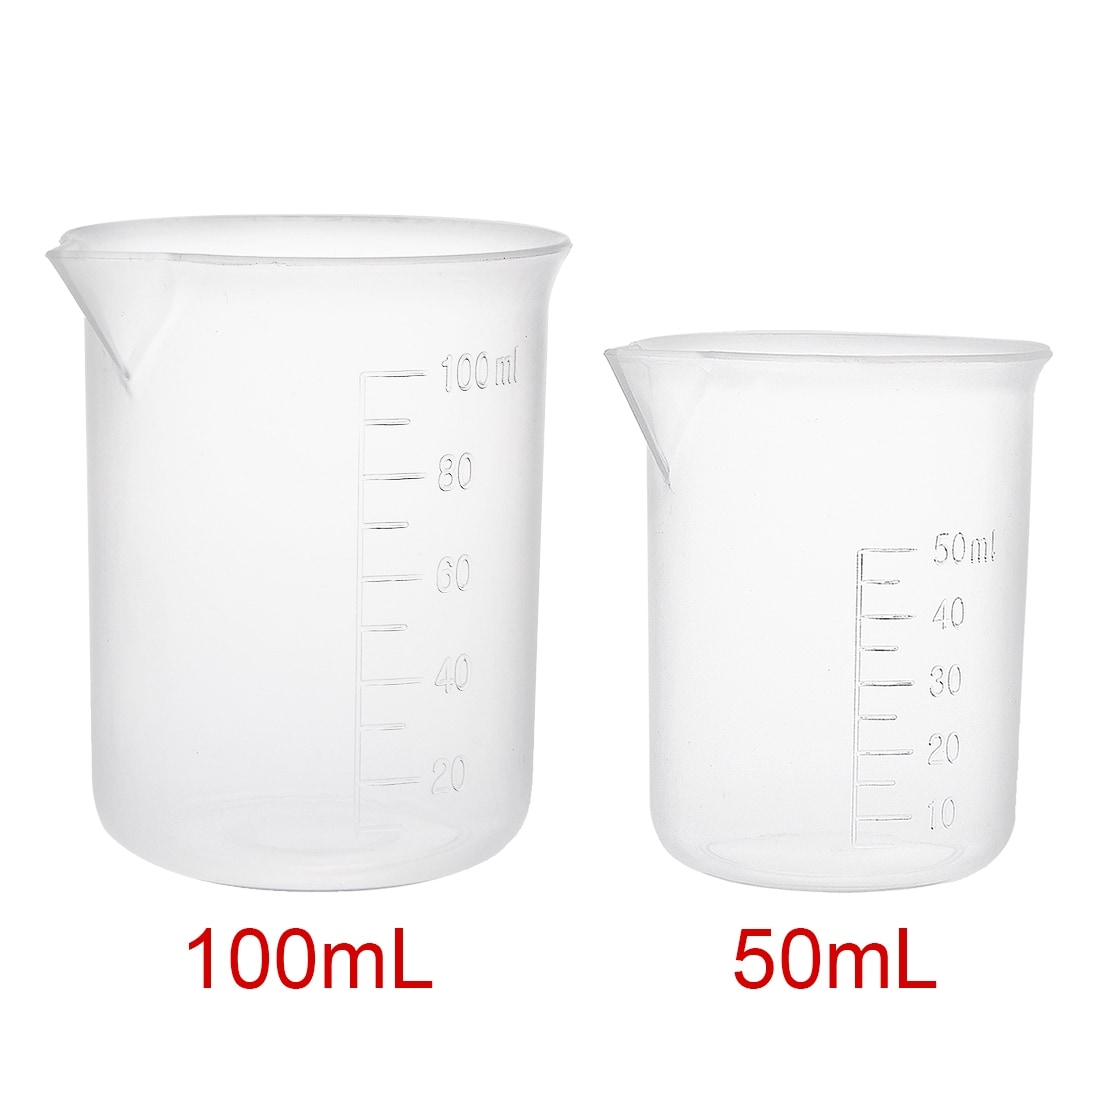 https://ak1.ostkcdn.com/images/products/is/images/direct/99d6d88154cd55a244df70ea7f133cea64b3088f/Set-of-2-Measuring-Cup-Labs-Clear-Plastic-Graduated-Beakers-50ml-100ml.jpg